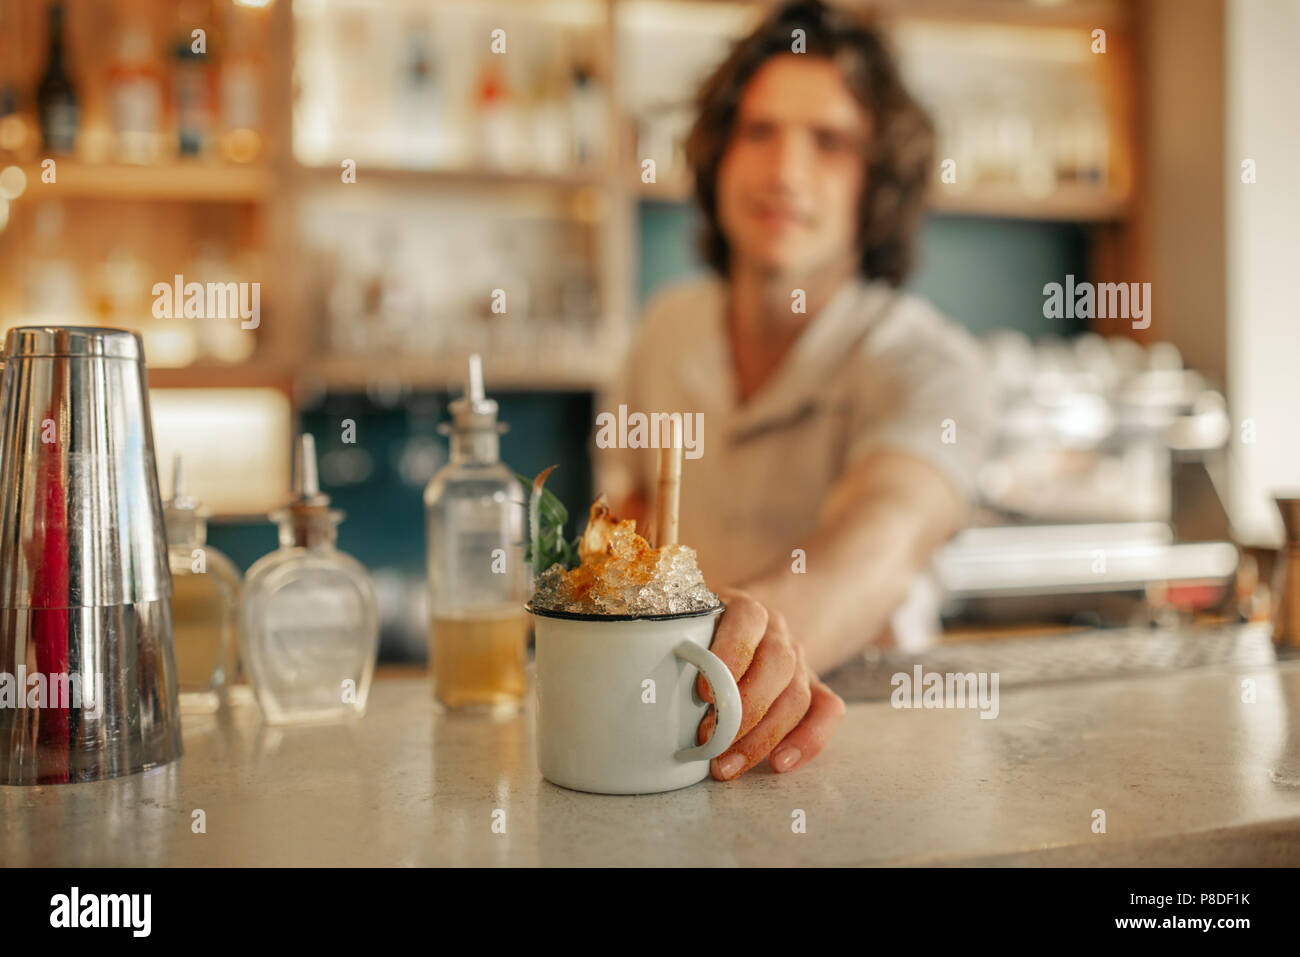 Bartender serving drinks behind the counter of a trendy bar Stock Photo